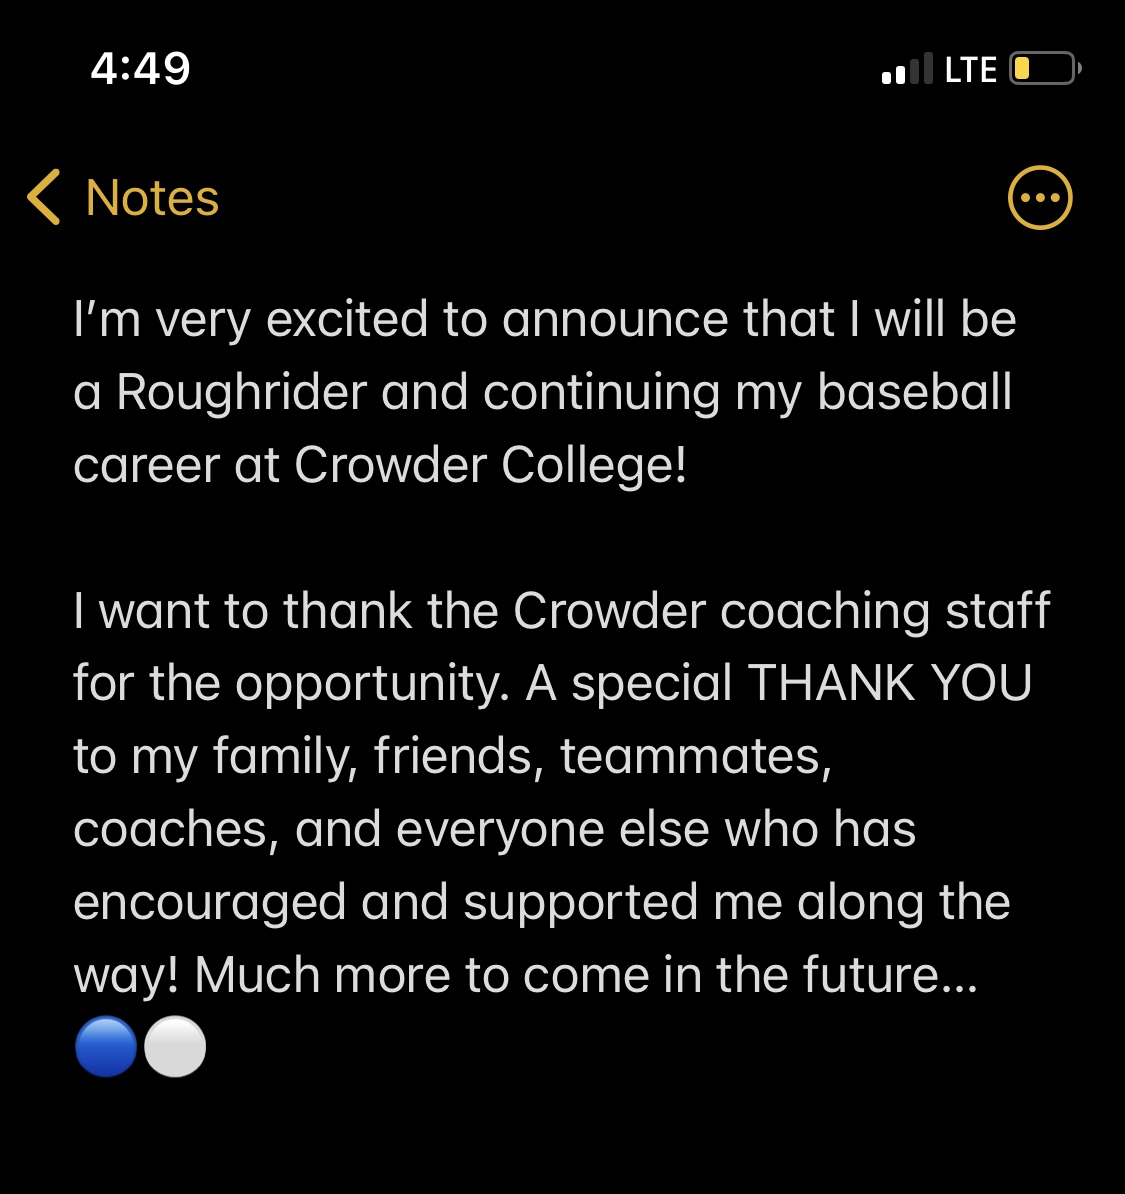 I’m very excited to announce that I will be a Roughrider and continuing my baseball career at Crowder College! @hbhs_varsity @AR_Sticks @CrowderBasebal1 @Brewsterc29 @PBR_Arkansas @PerfectGameUSA @JBrownPG @3N2Sports @Tsaw03